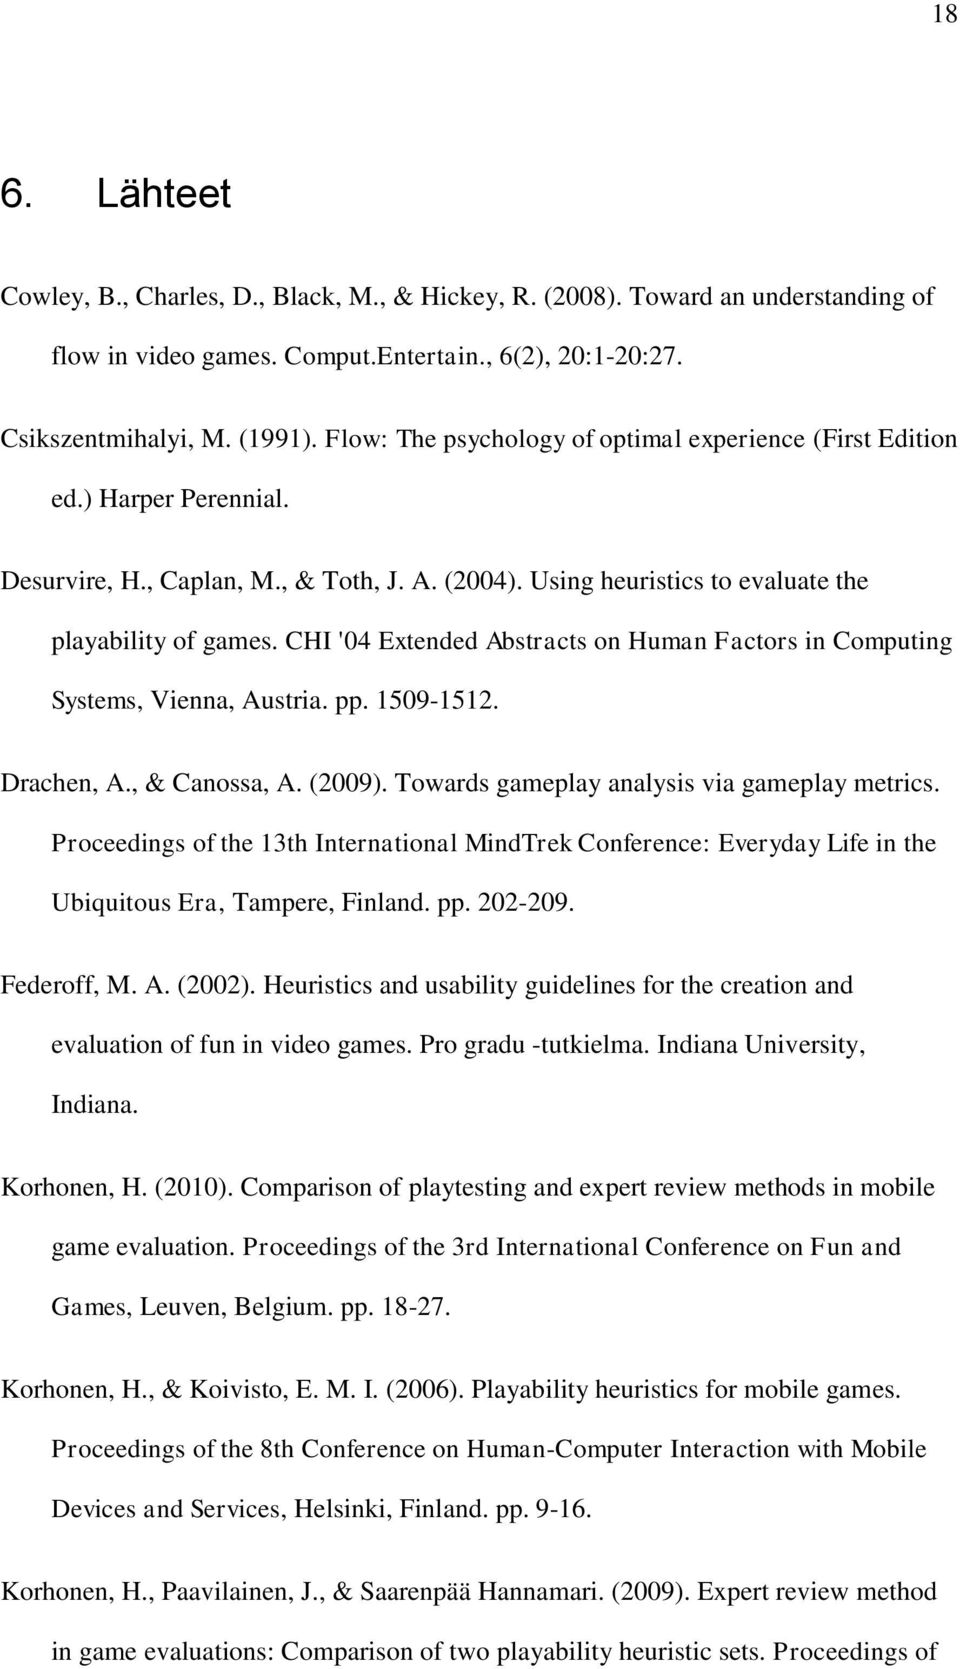 CHI '04 Extended Abstracts on Human Factors in Computing Systems, Vienna, Austria. pp. 1509-1512. Drachen, A., & Canossa, A. (2009). Towards gameplay analysis via gameplay metrics.